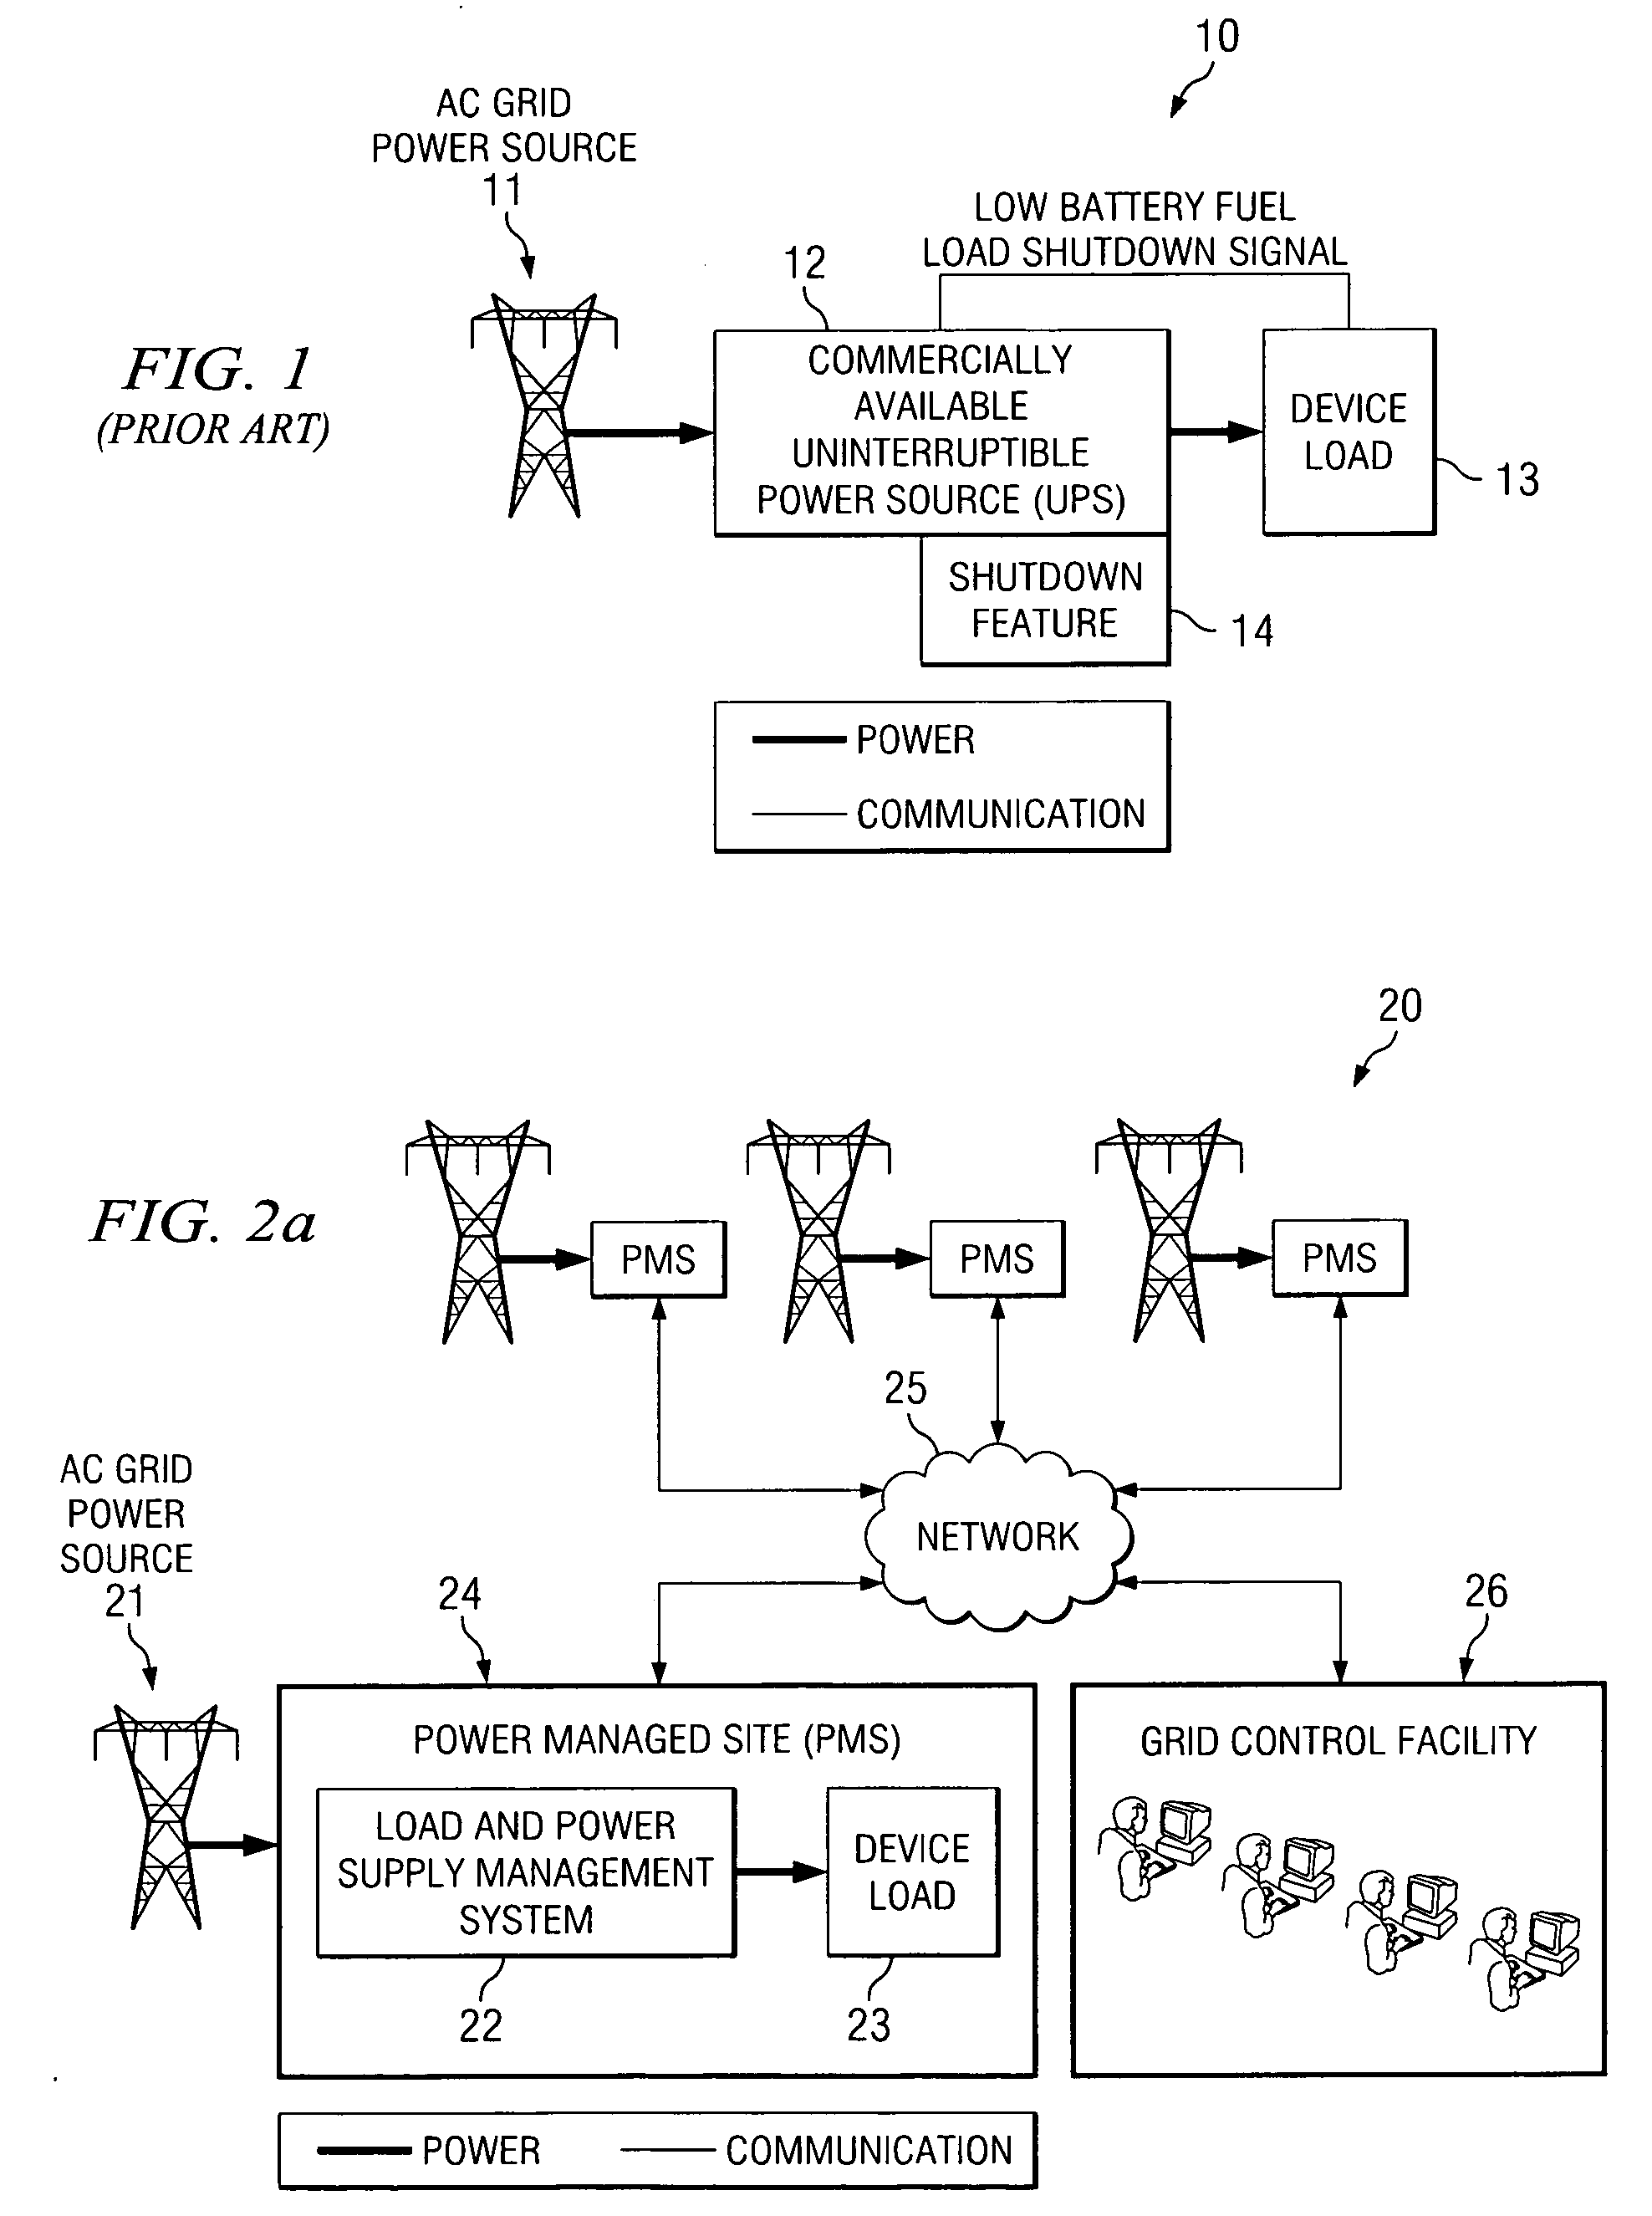 Fast acting distributed power system for transmission and distribution system load using energy storage units